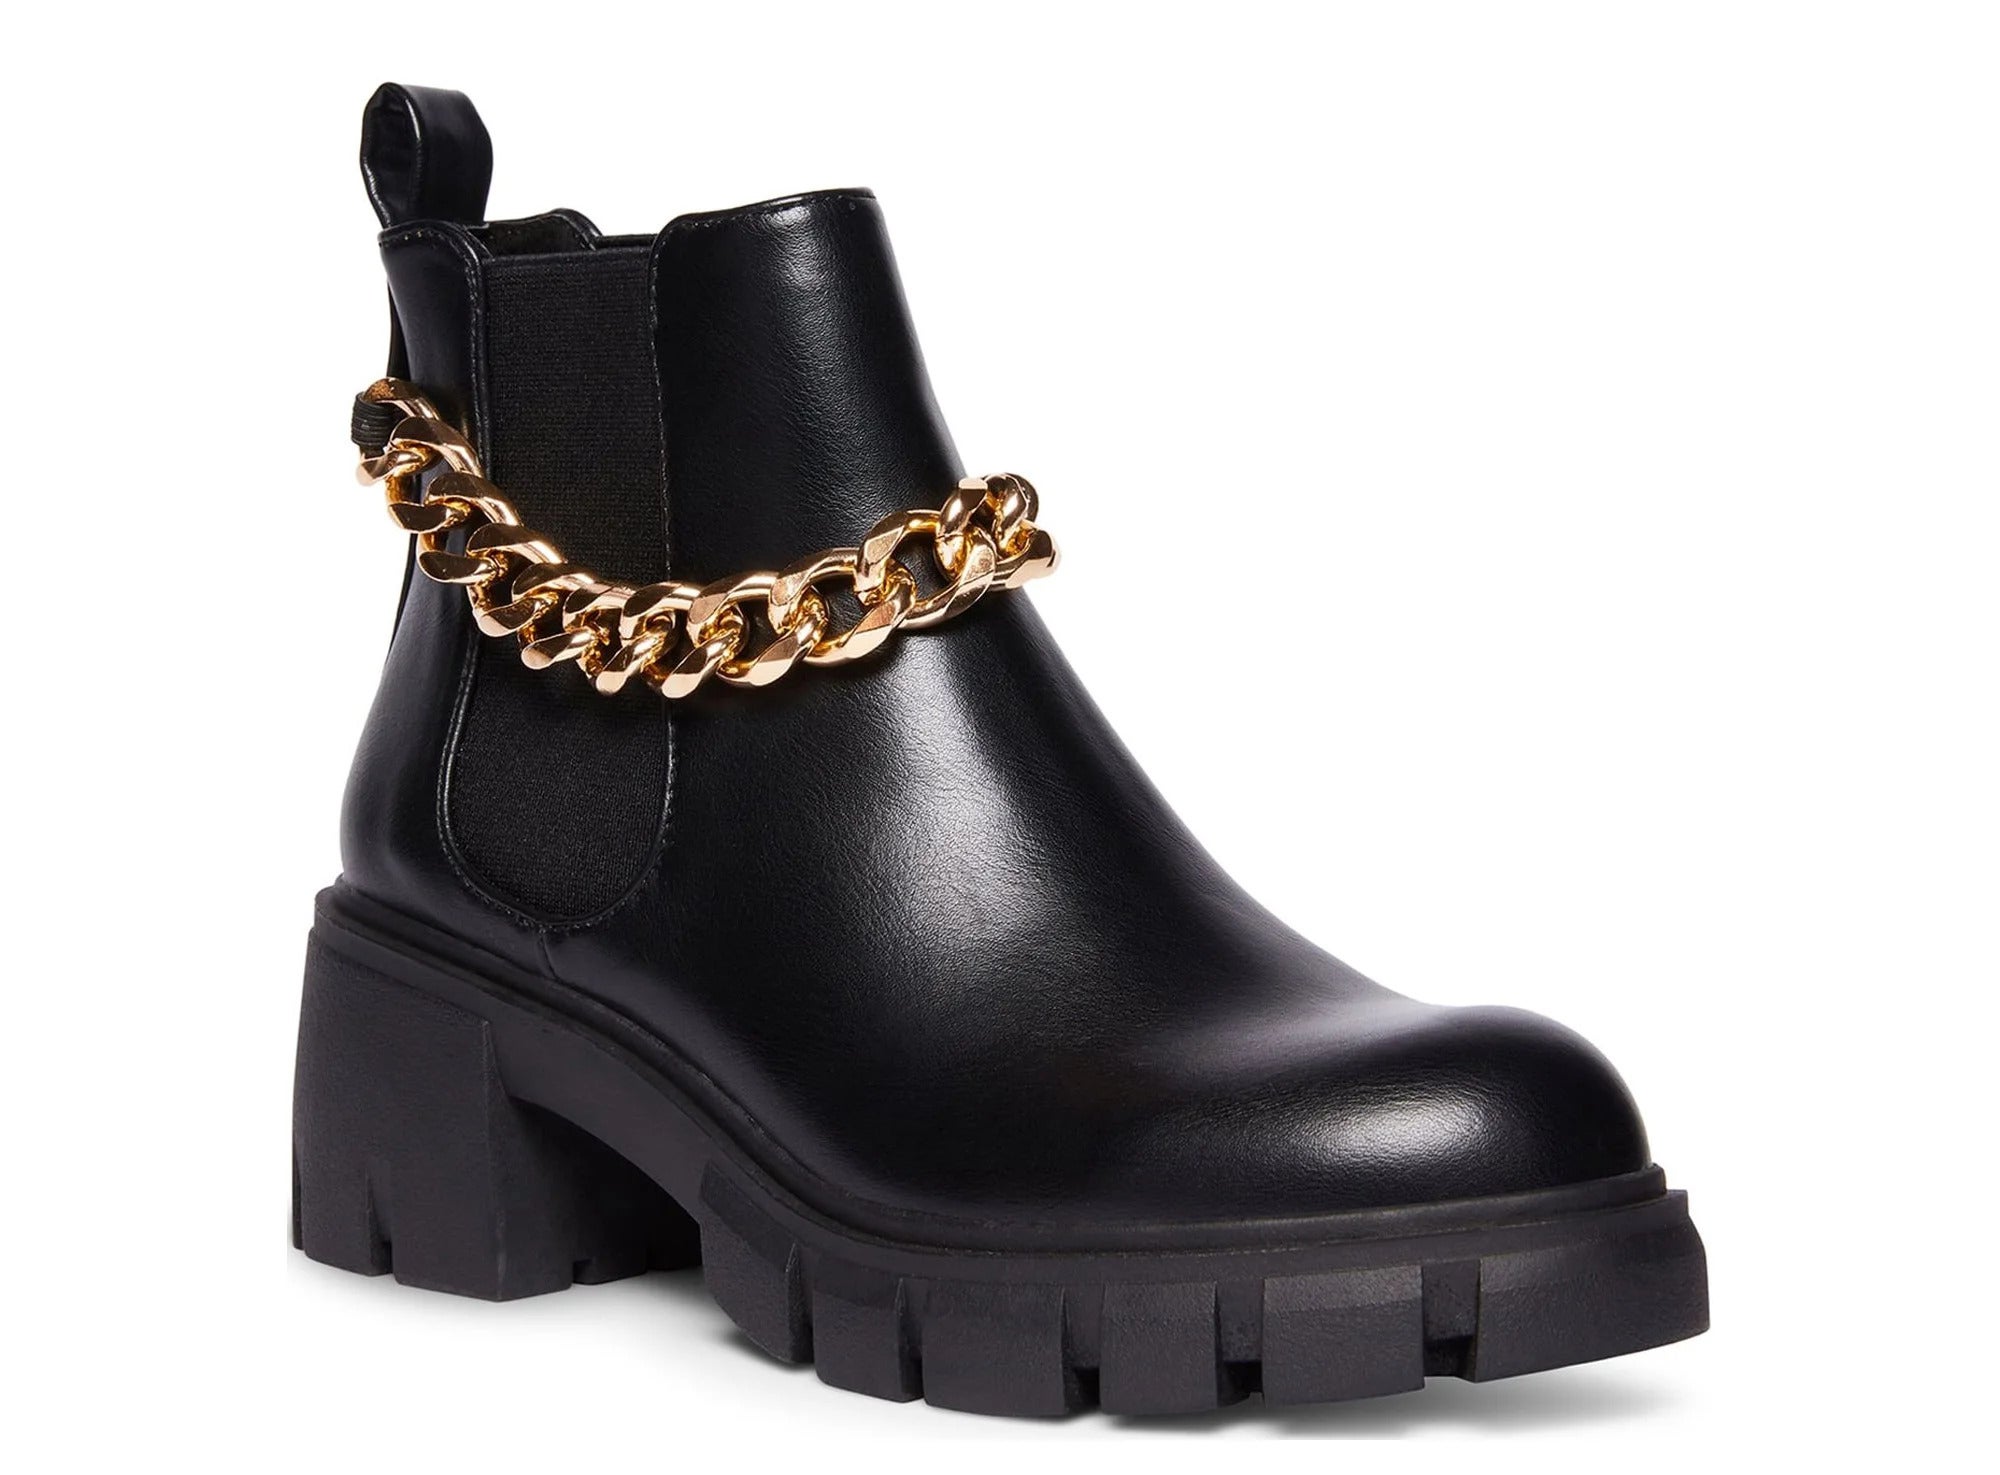 The boot with a gold chain around the ankle